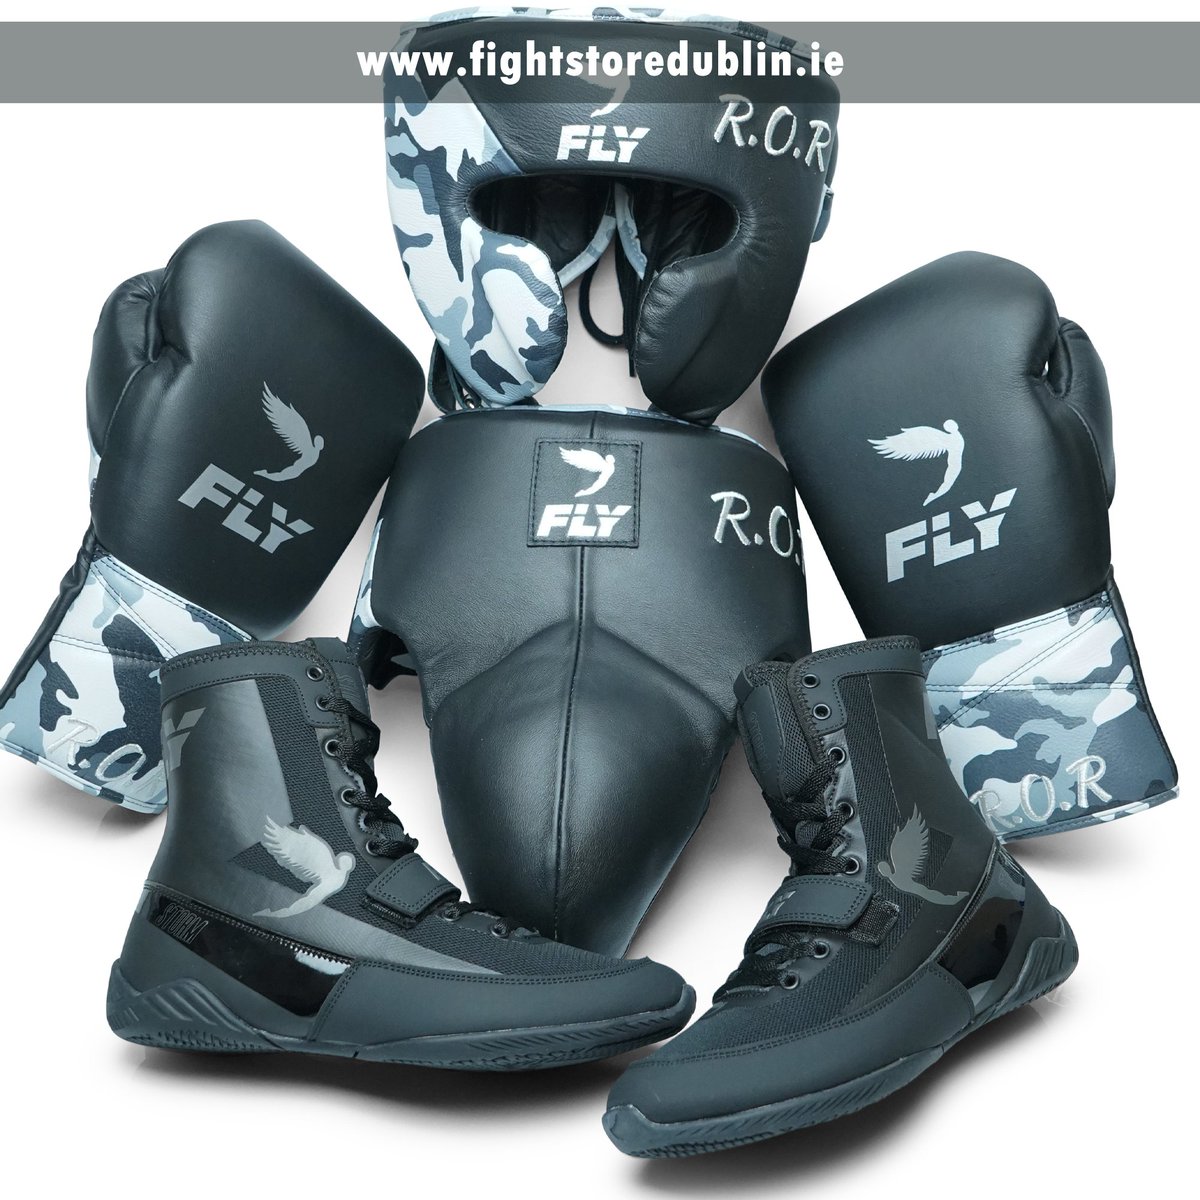 Check out this custom Black Camo #fly set with matching #storm boxing boots from #fightstoreireland #thefighterschoice® 
Contact us for your custom kit. 
FightStoreDublin.ie 
#boxing #irishboxing #boxe #boxeo #boxen #custommade #madeintheuk